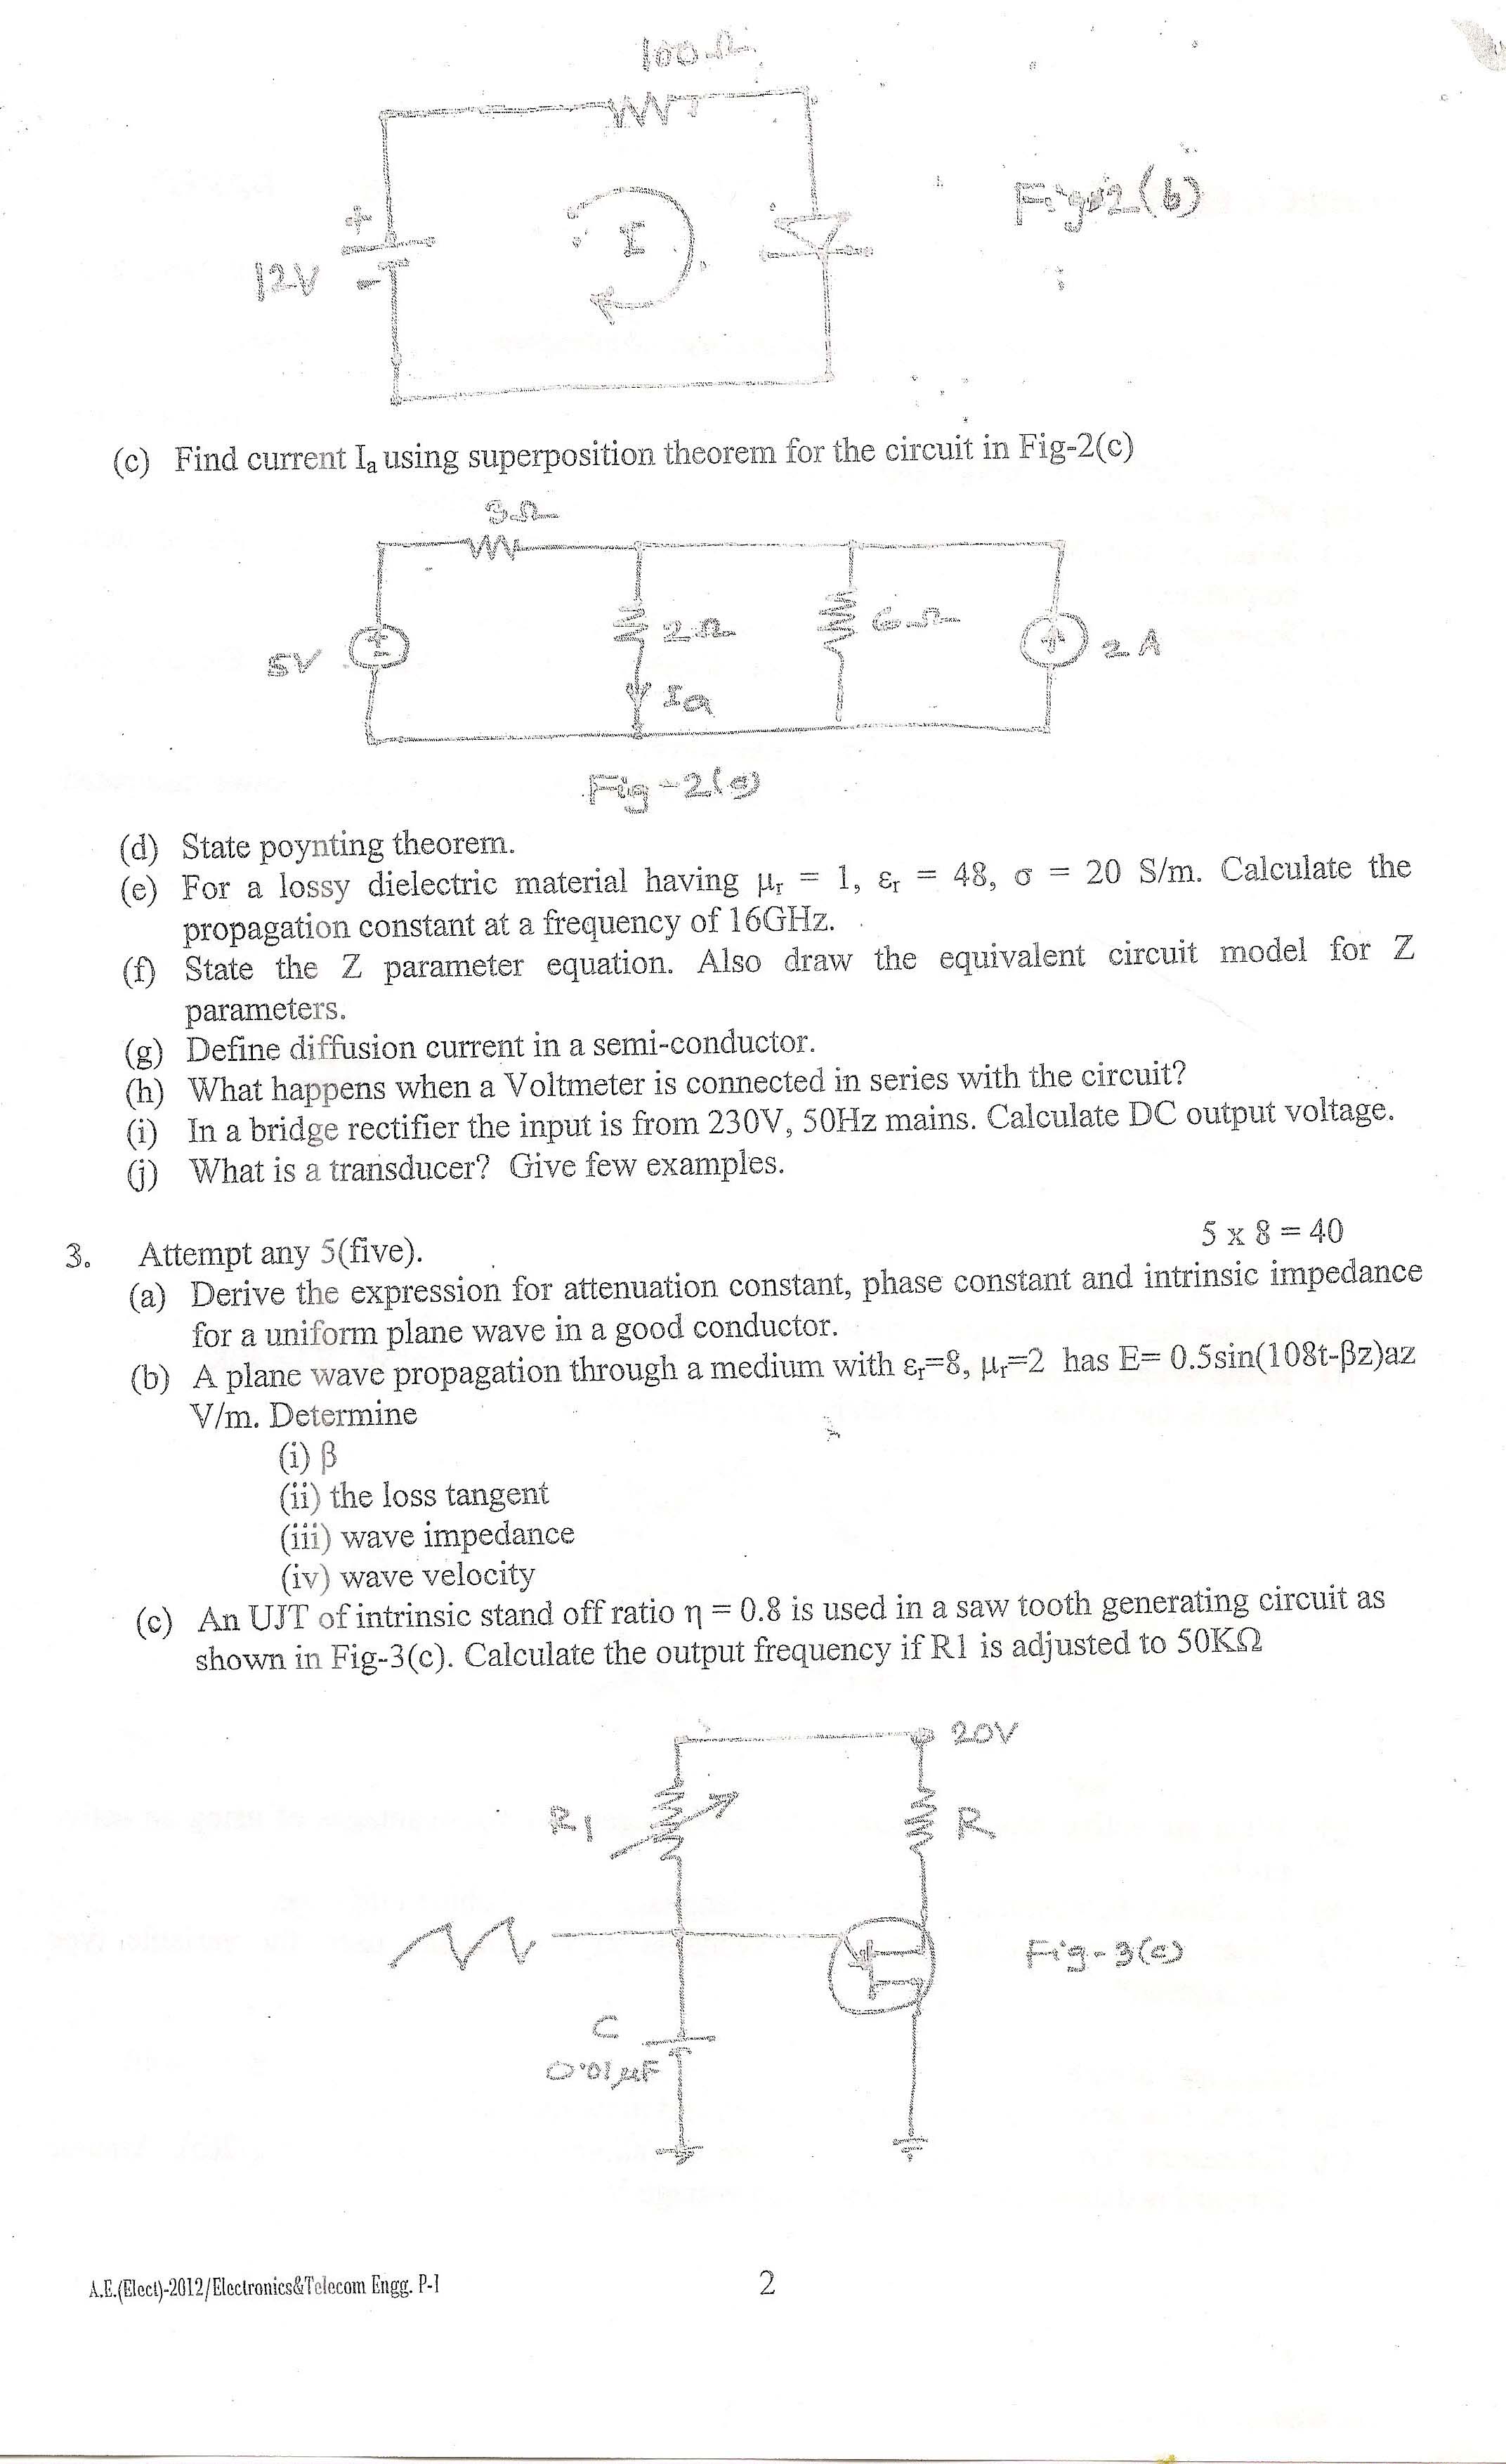 APPSC AE Electrical Exam 2012 Electronics and Telecommunication Paper I 2